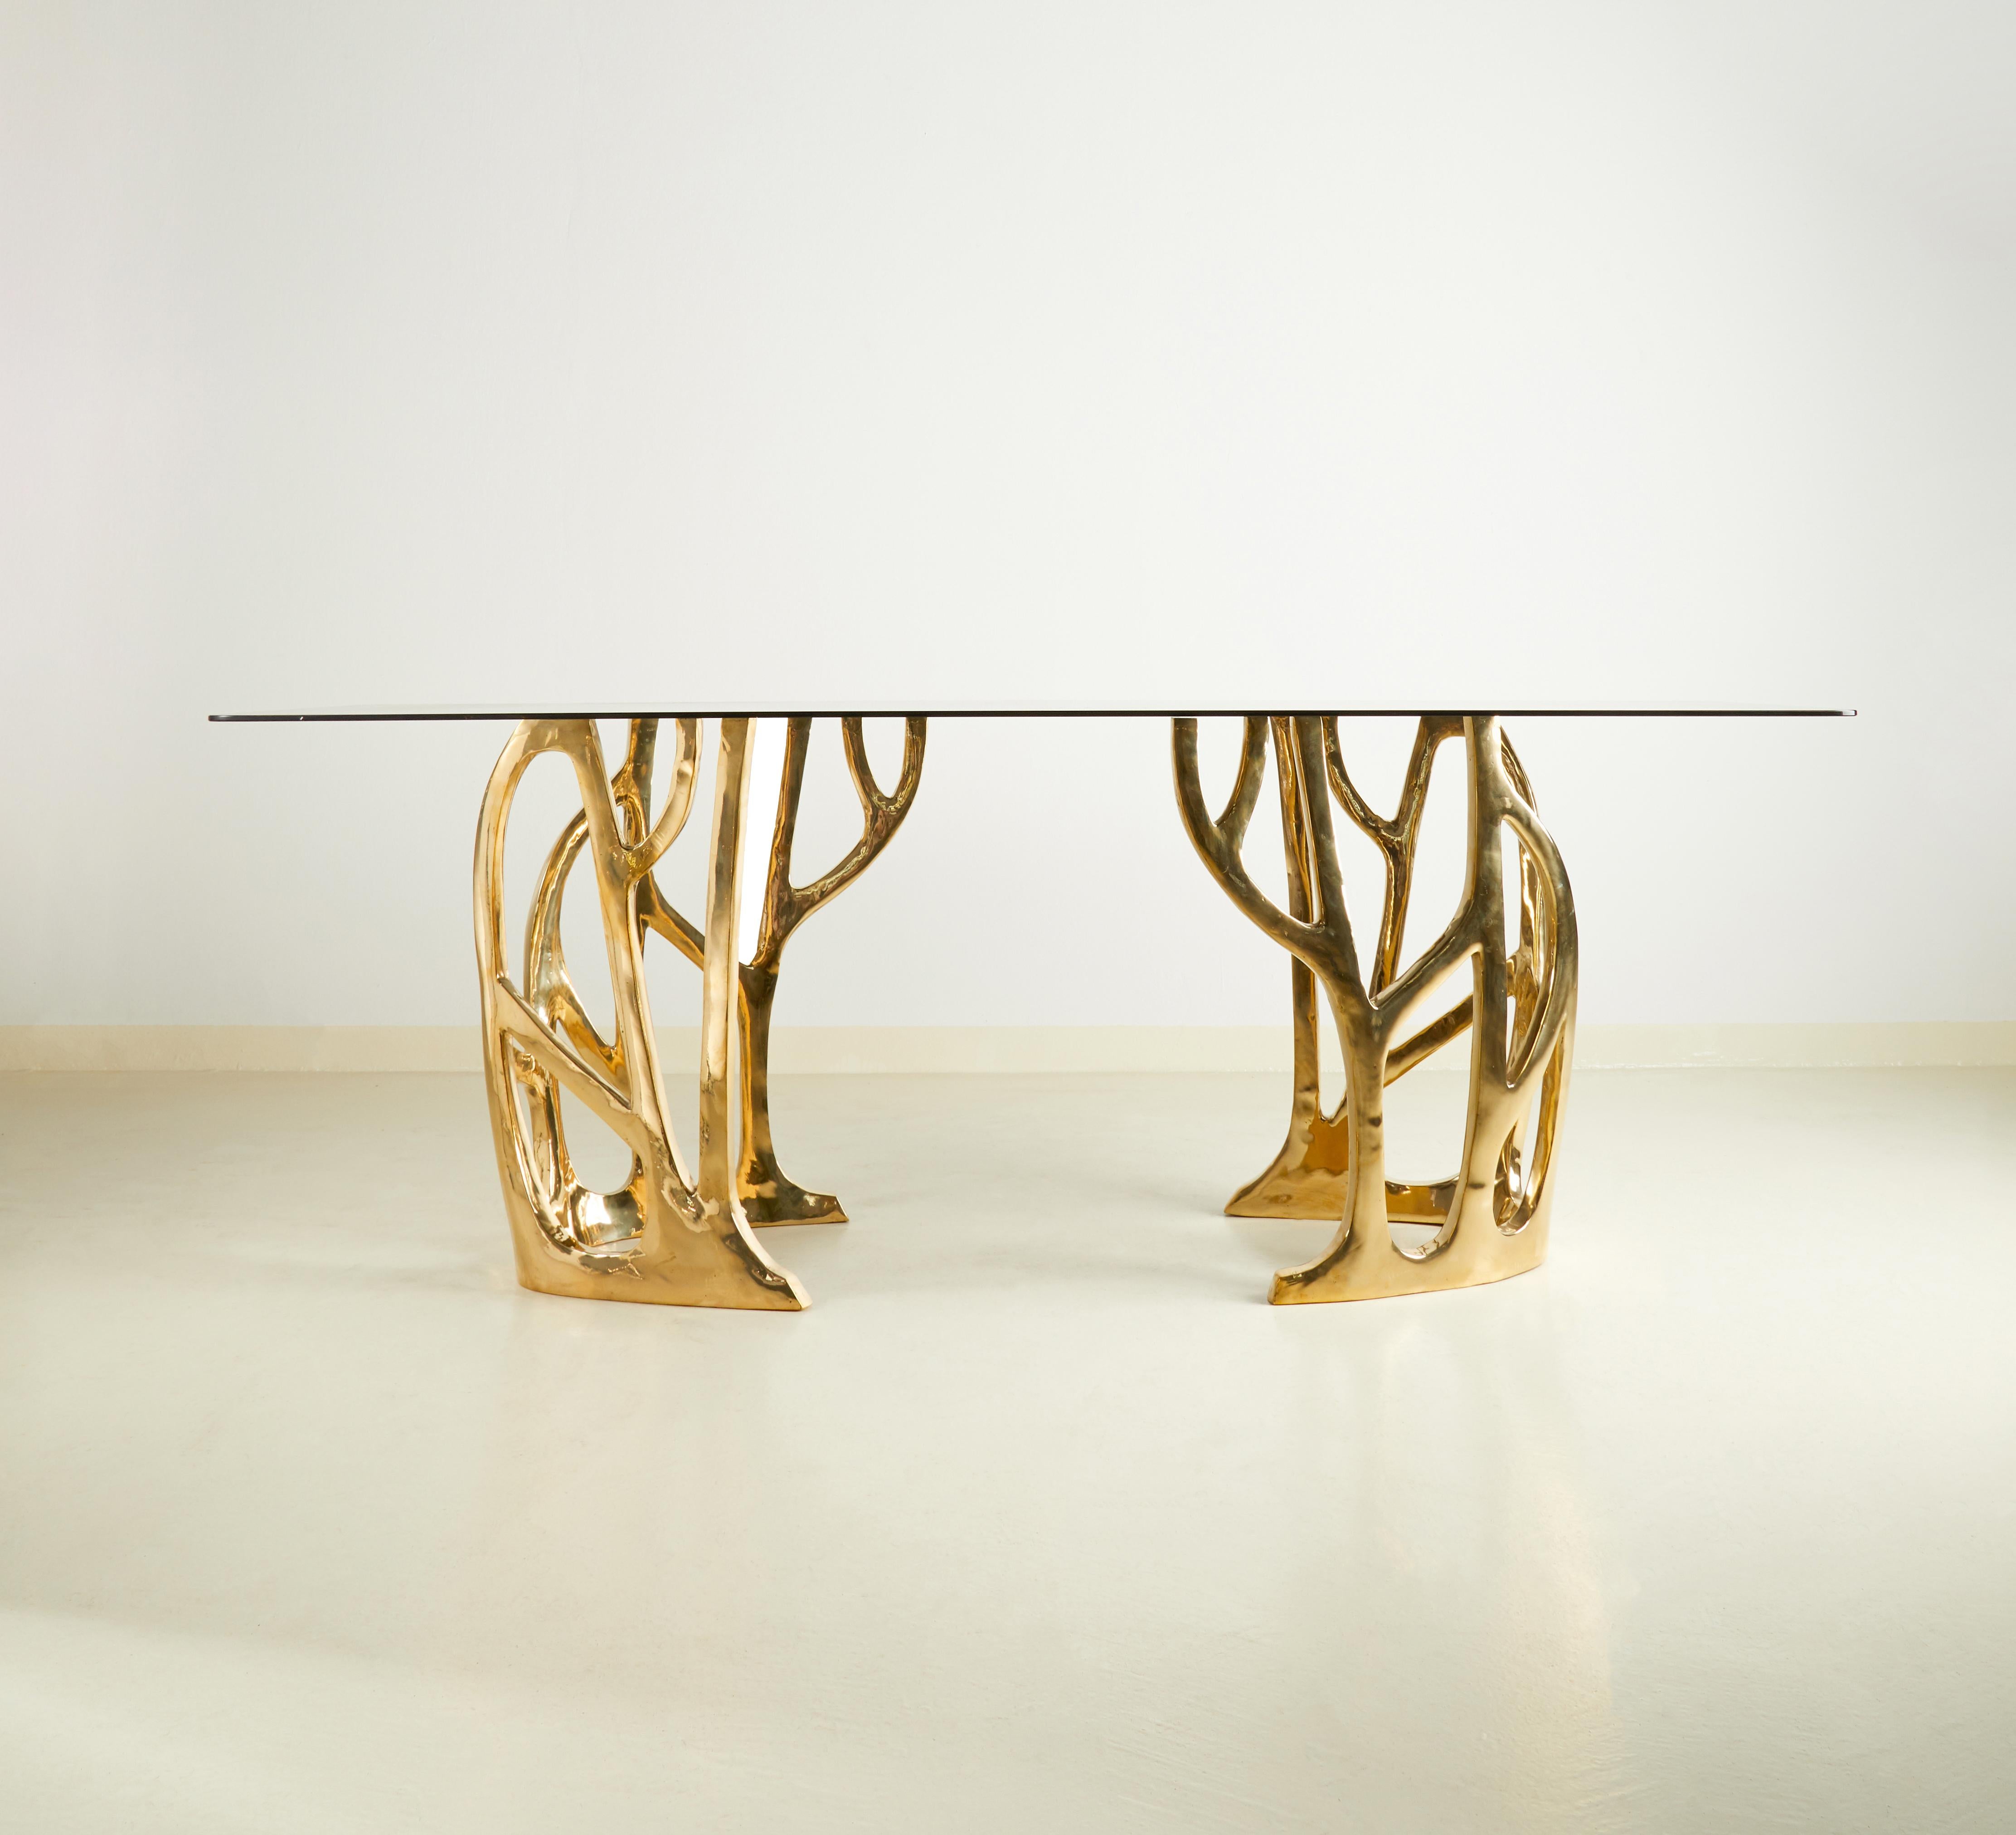 Brass coffee table, Galaxy by Misaya
Dimensions: W 40 x L 40 x H 69 cm
Hand-sculpted brass table.